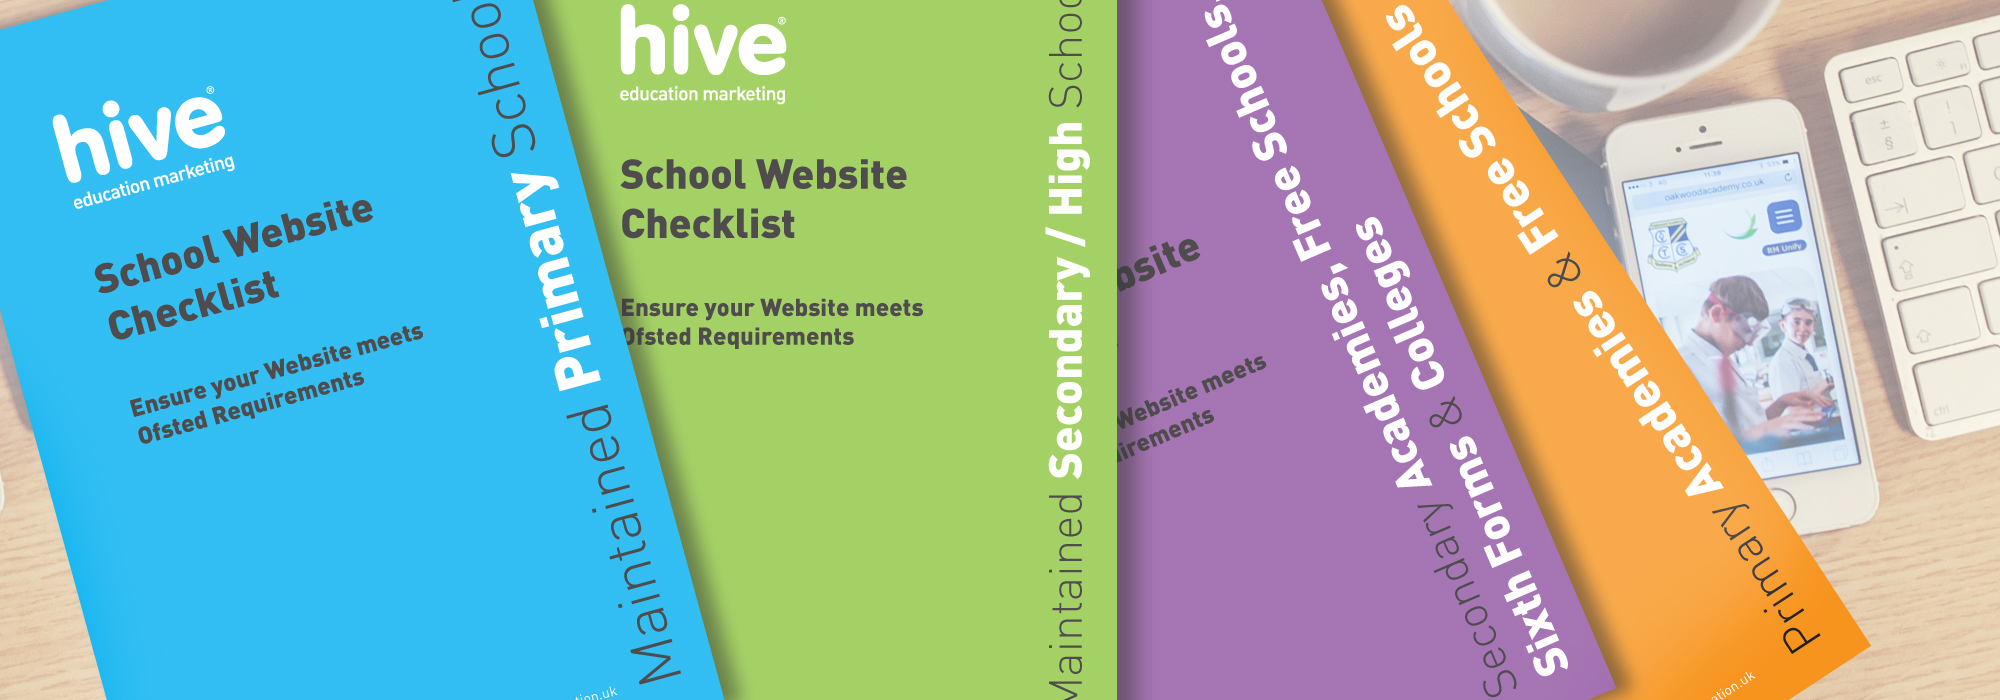 Ofsted School Website Requirements Checklist Image